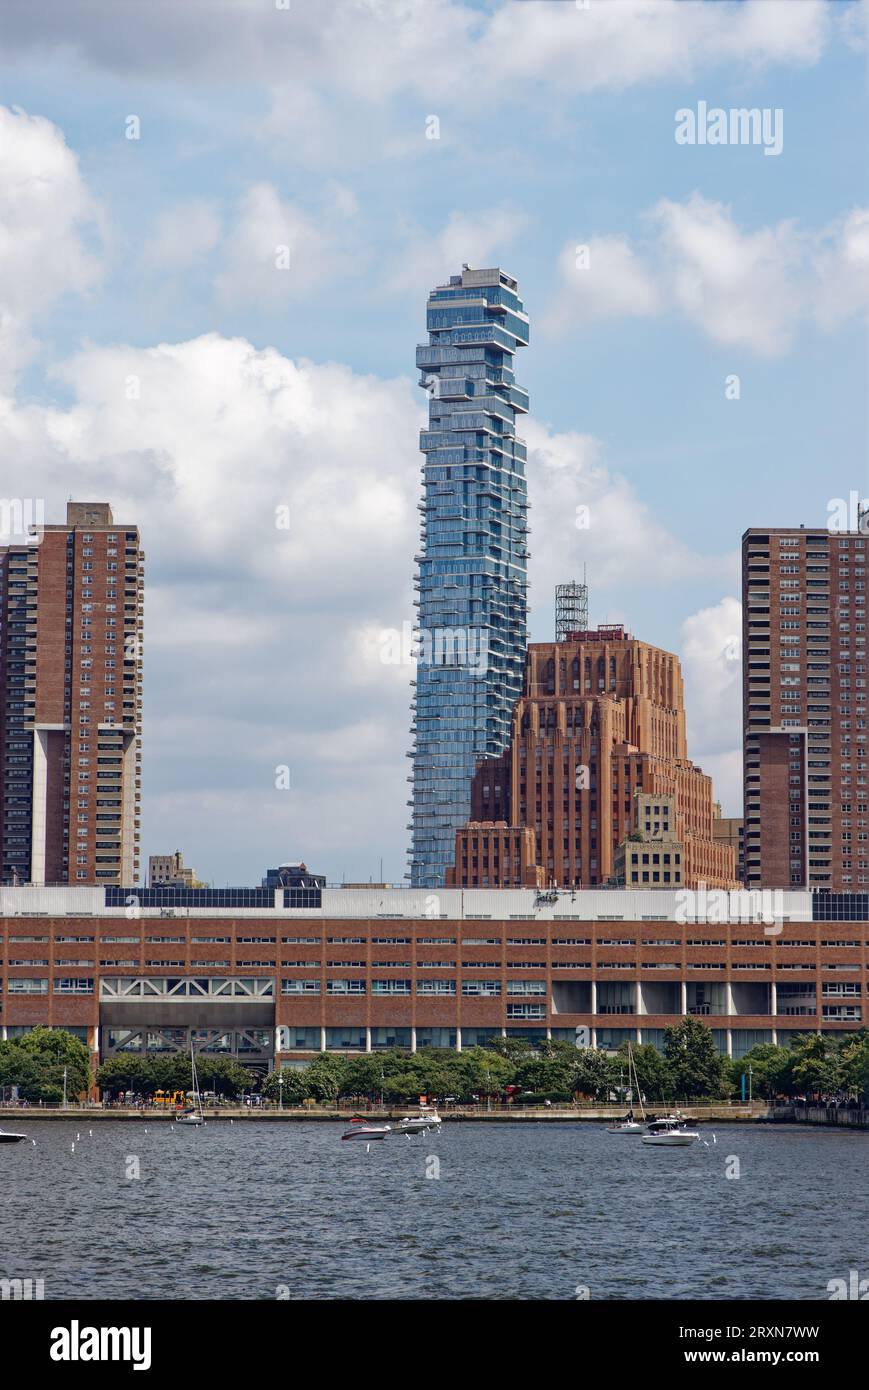 56 Leonard Street, aka Jenga Building, is a Herzog & de Meuron residential design completed in 2017; condos there are among the priciest in NYC. Stock Photo